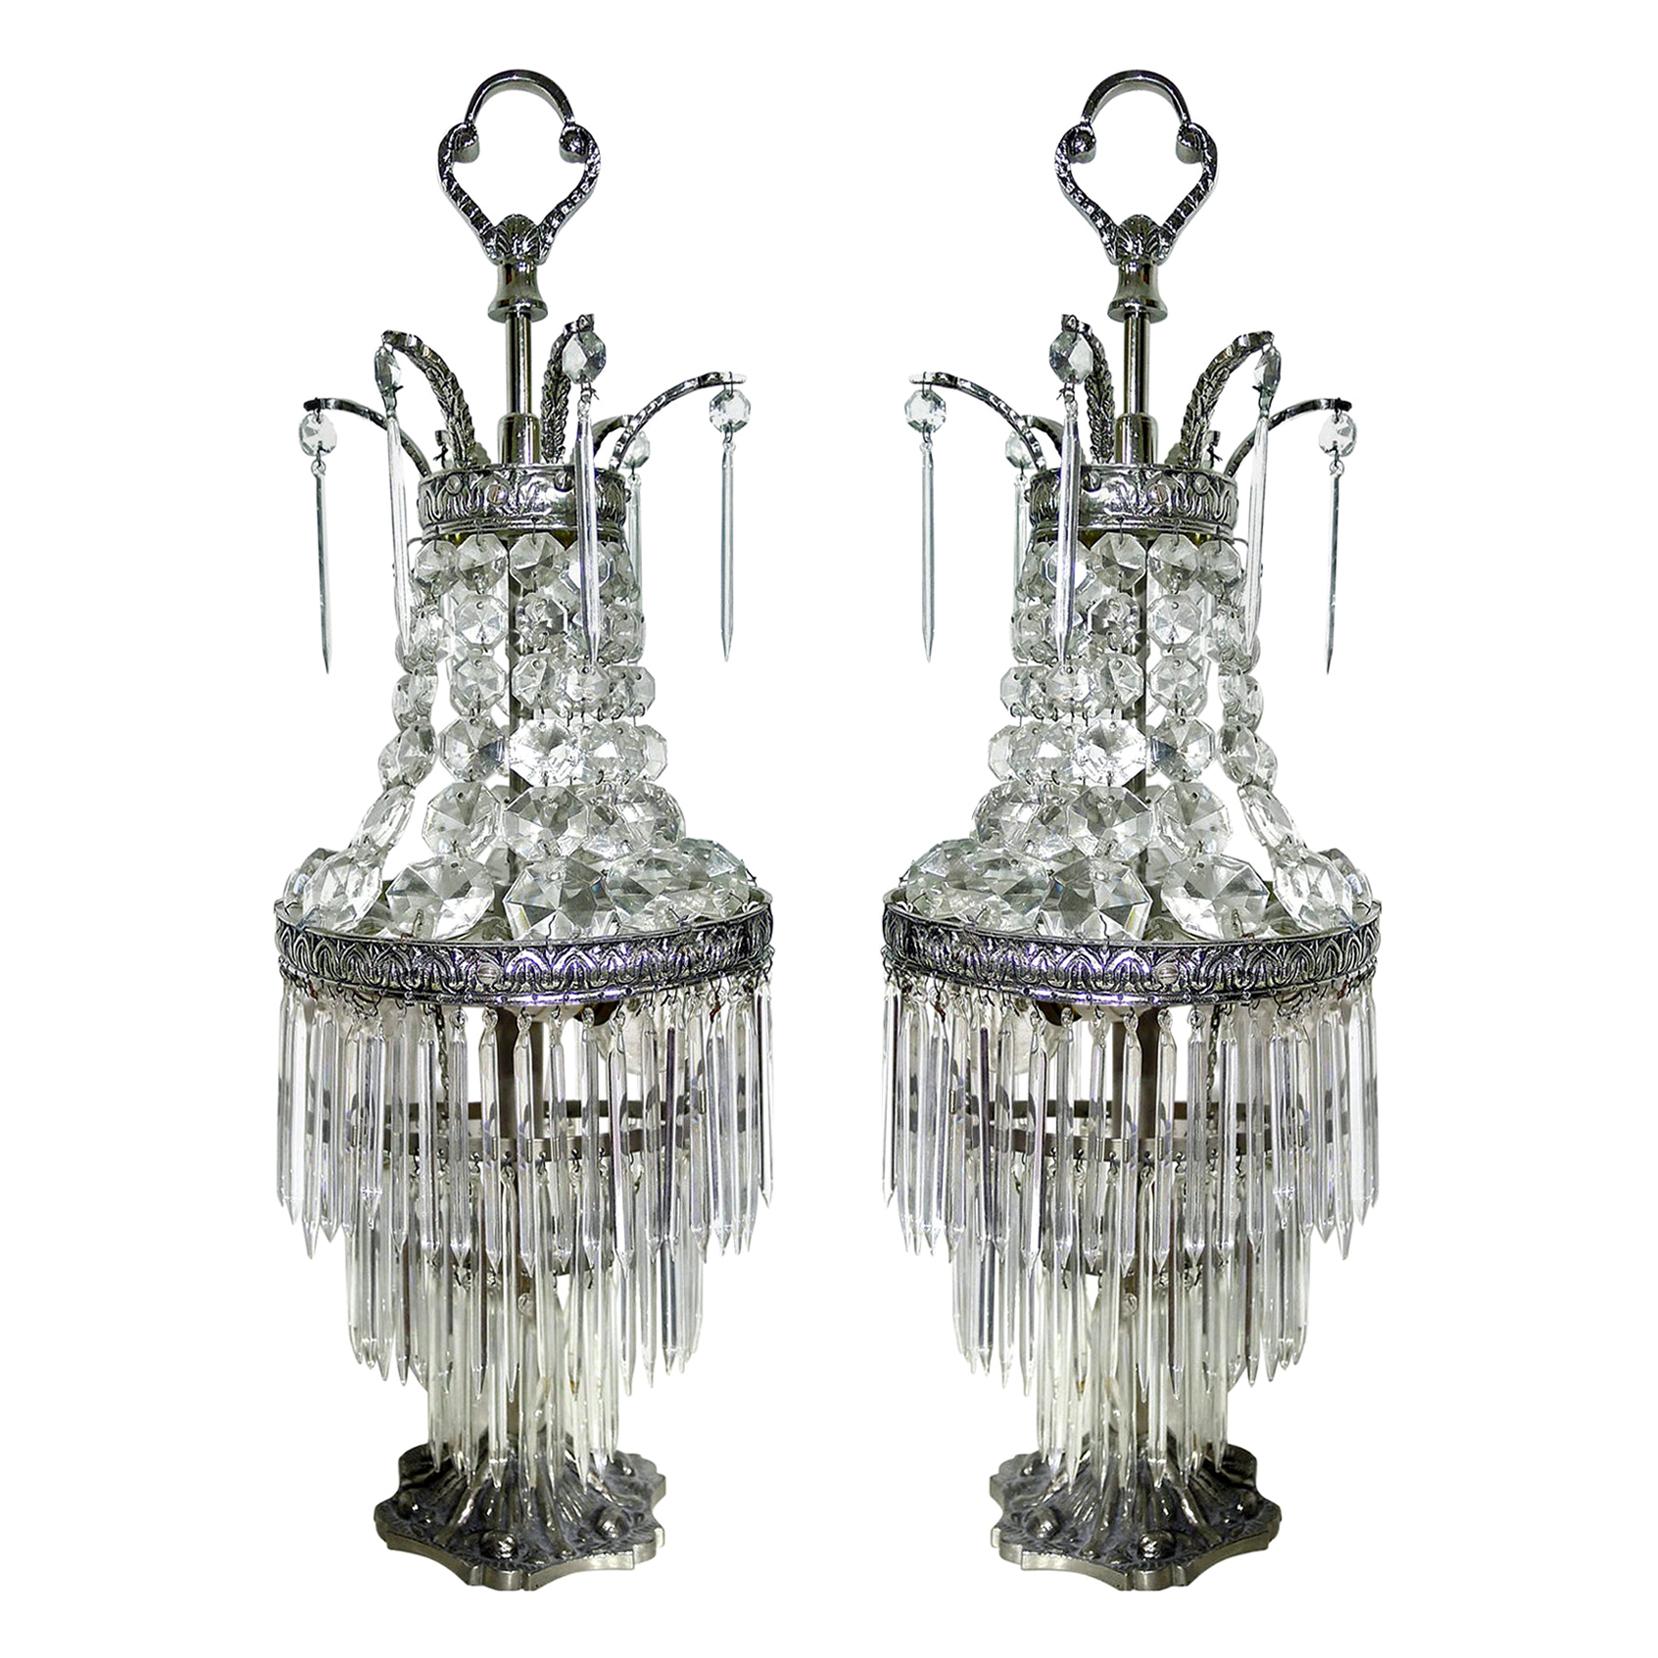 Pair of French Hollywood Regency Empire Silver Nickel & Crystal Table Lamps 1920